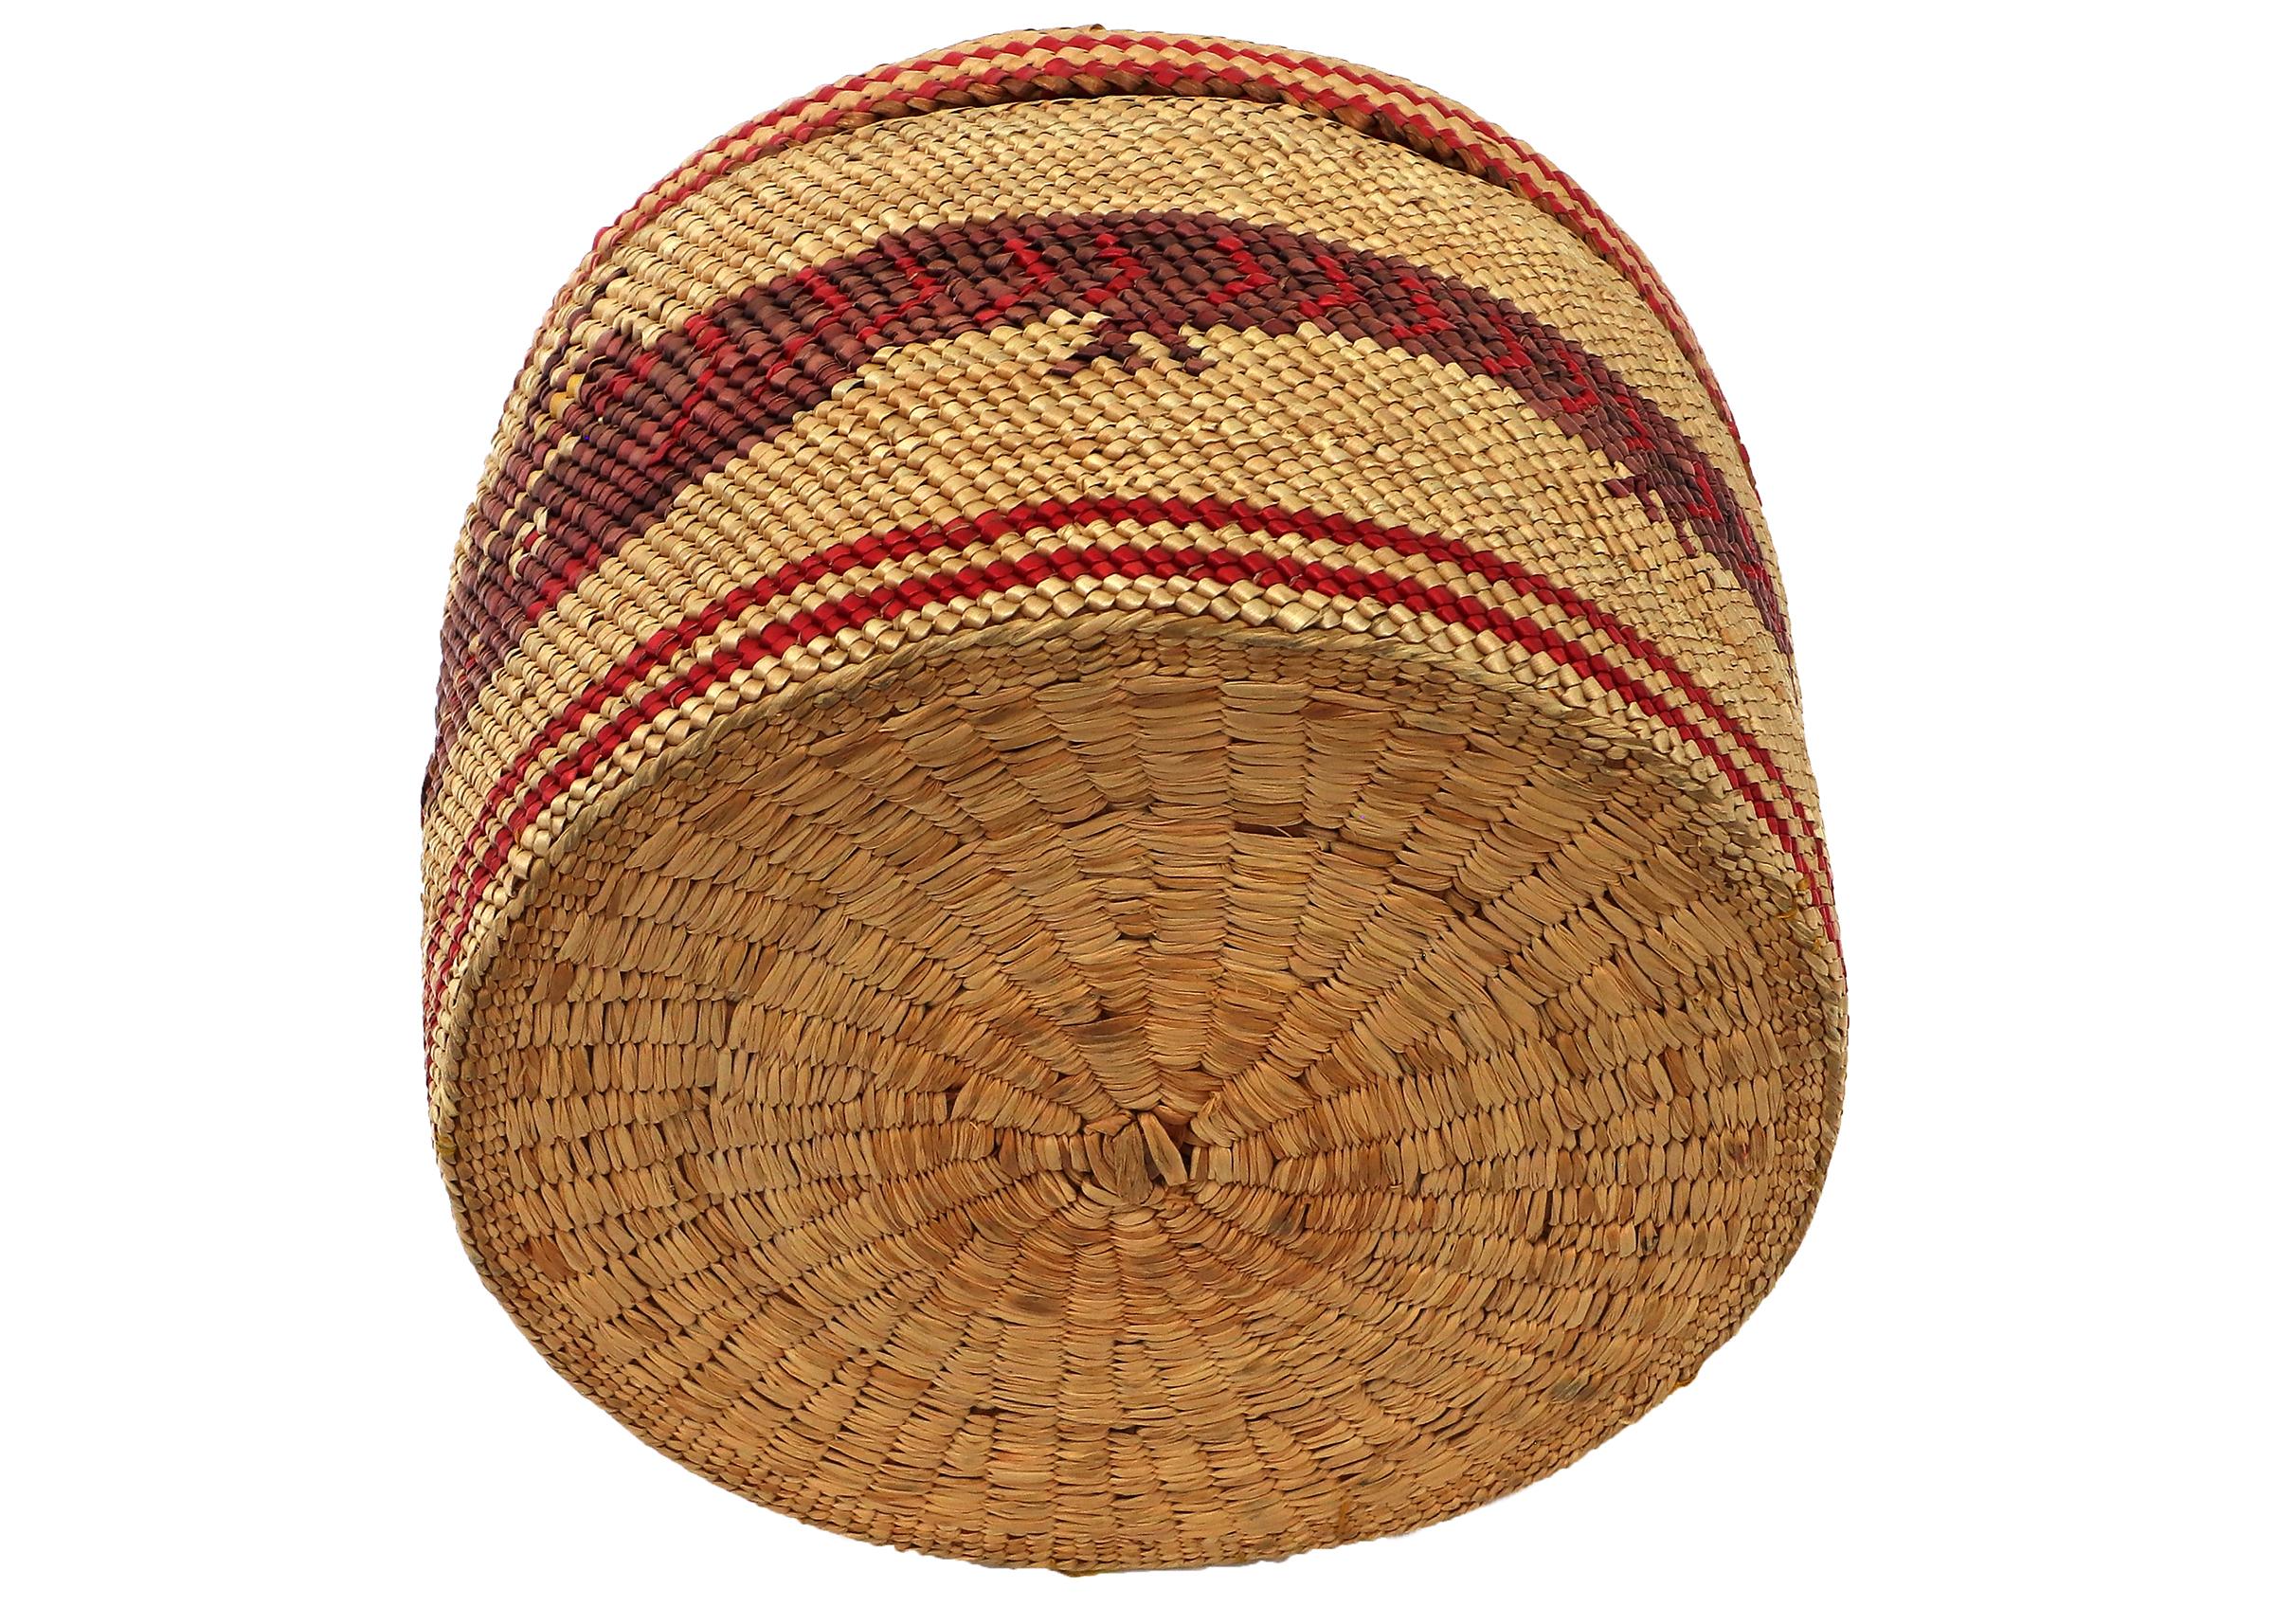 Nootka Northwest Coast 1900 Woven Basket with Top, Red and Black Designs In Good Condition For Sale In Denver, CO